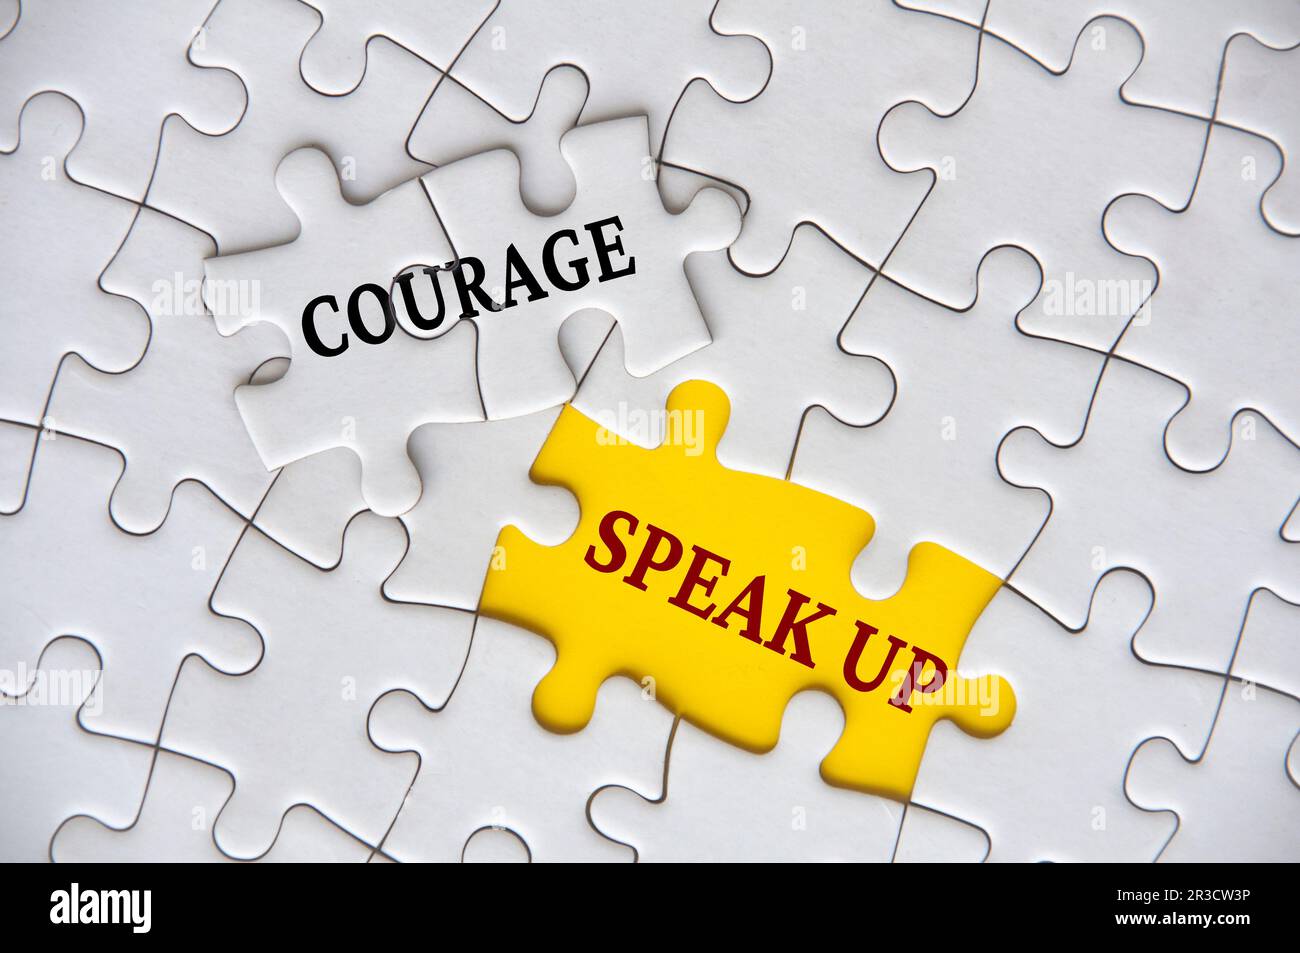 Courage to speak up text on missing jigsaw puzzle representing business  culture in exercising speak up Stock Photo - Alamy